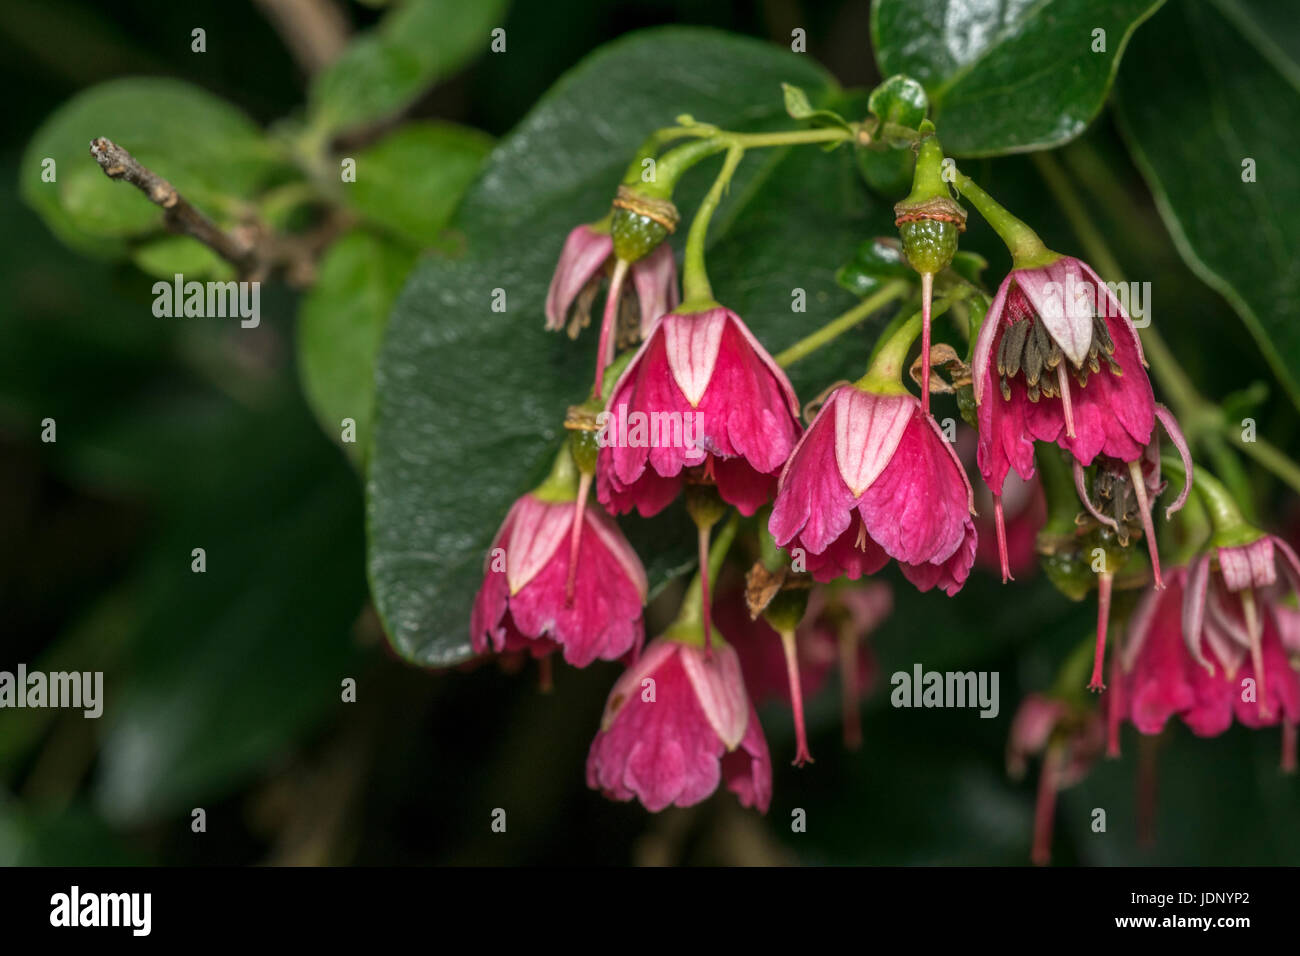 Pink phyllodoce flowers on a garden Stock Photo